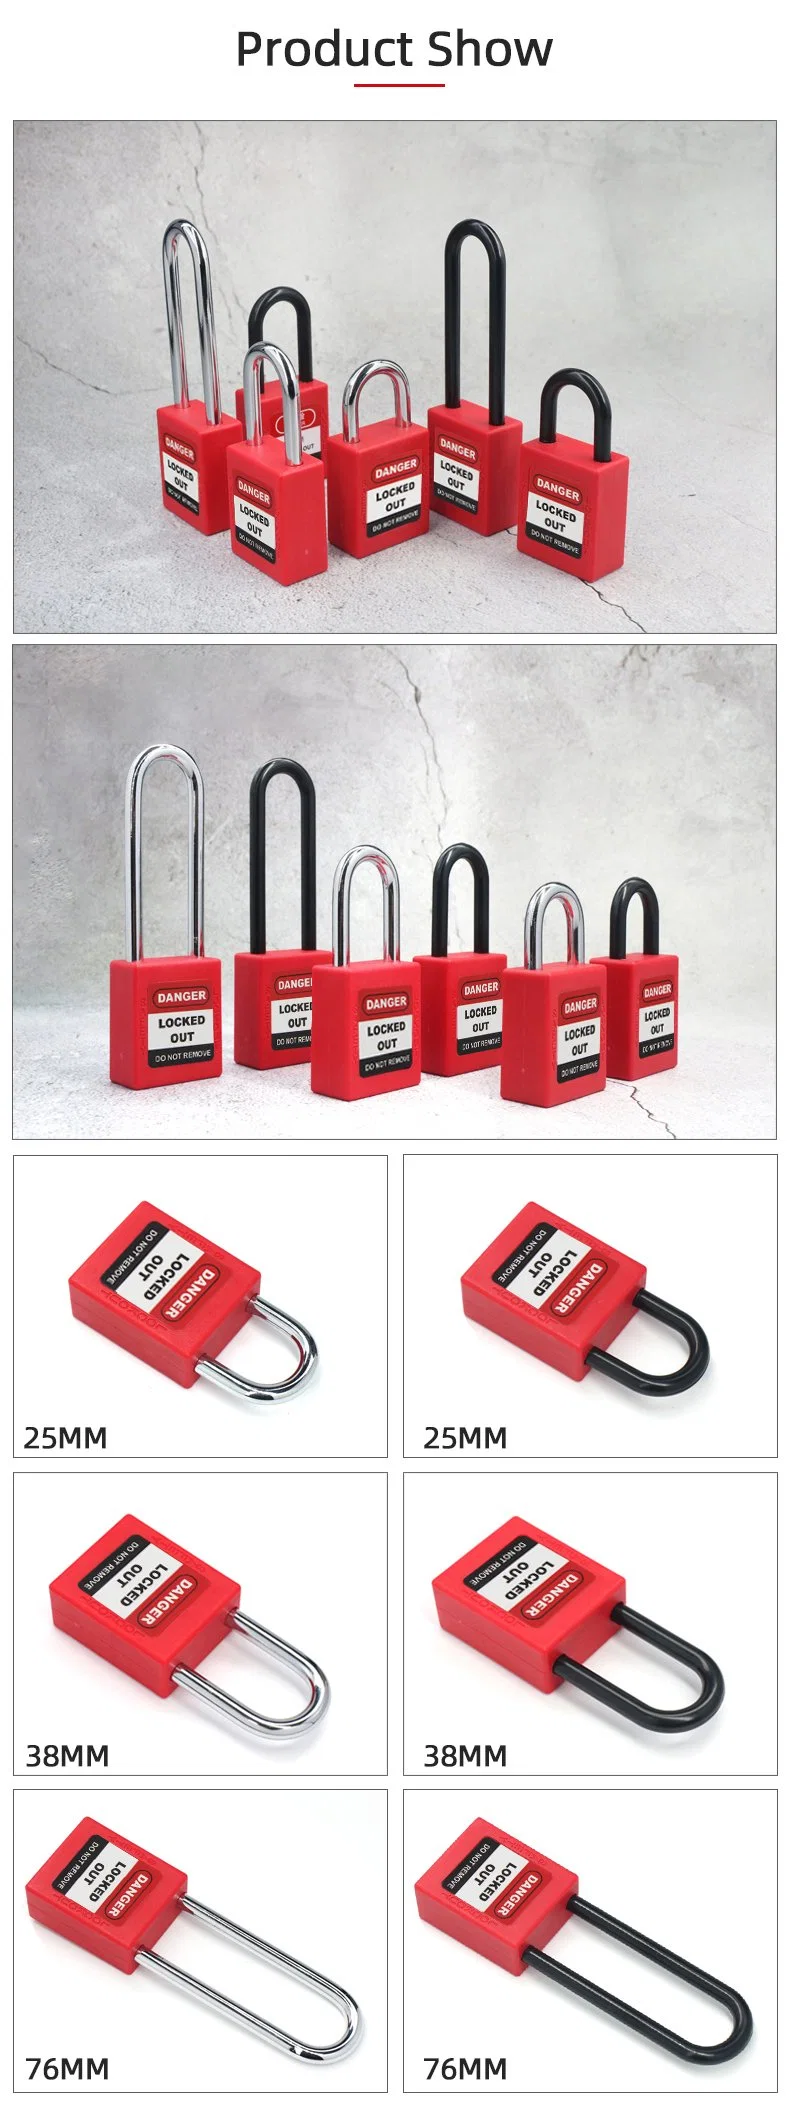 25mm Thin Shackle Industry Custom Safety Padlock Security Lockout Tagout Safe Lock